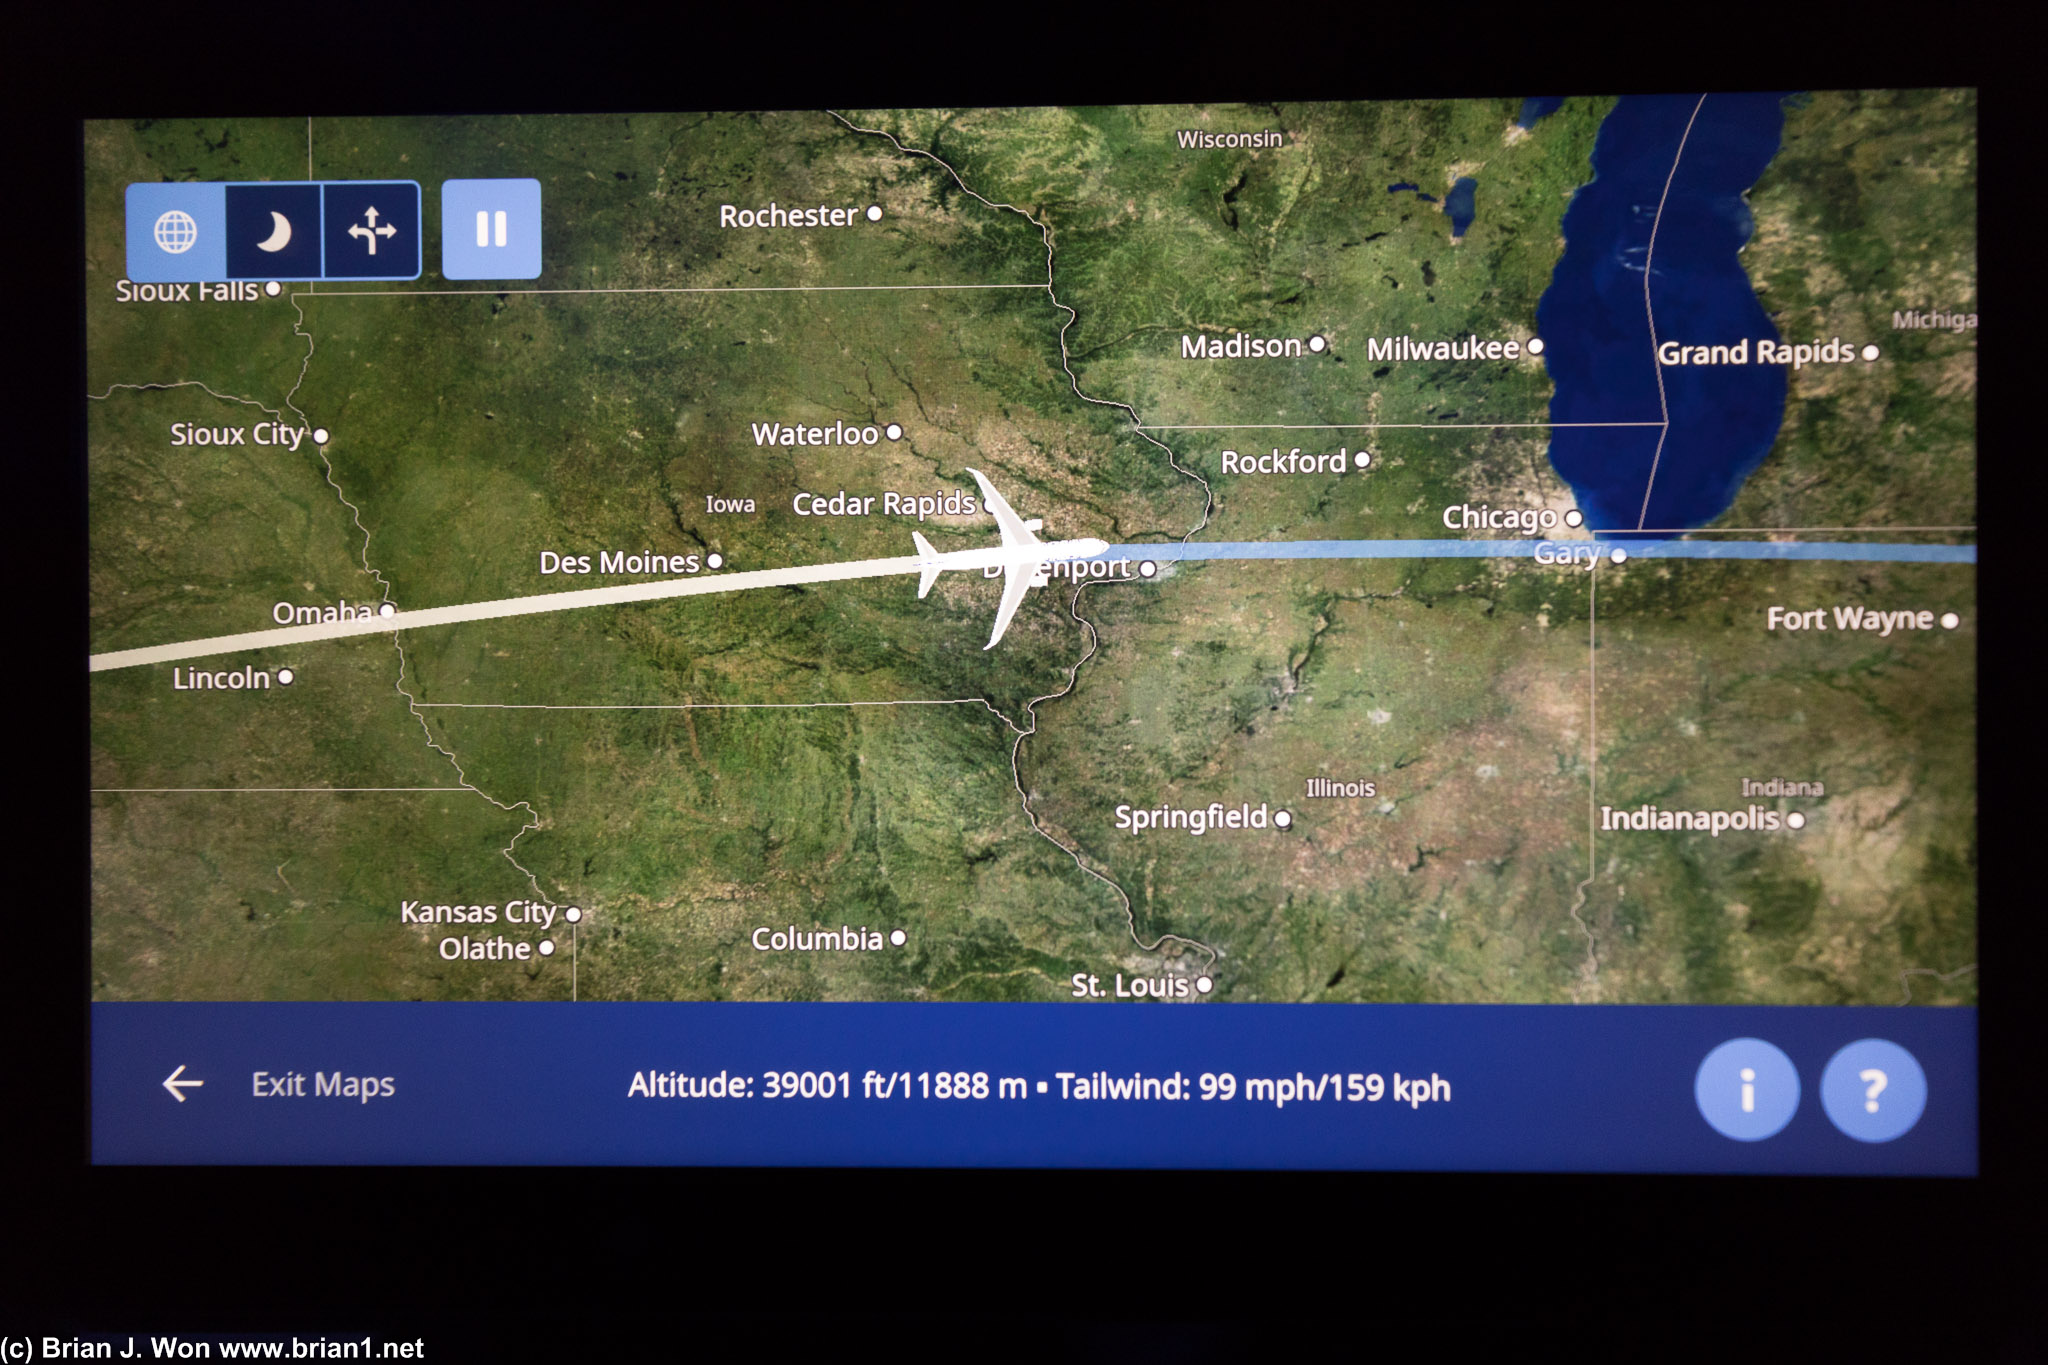 High quality in-flight map. Sadly no tailcam.